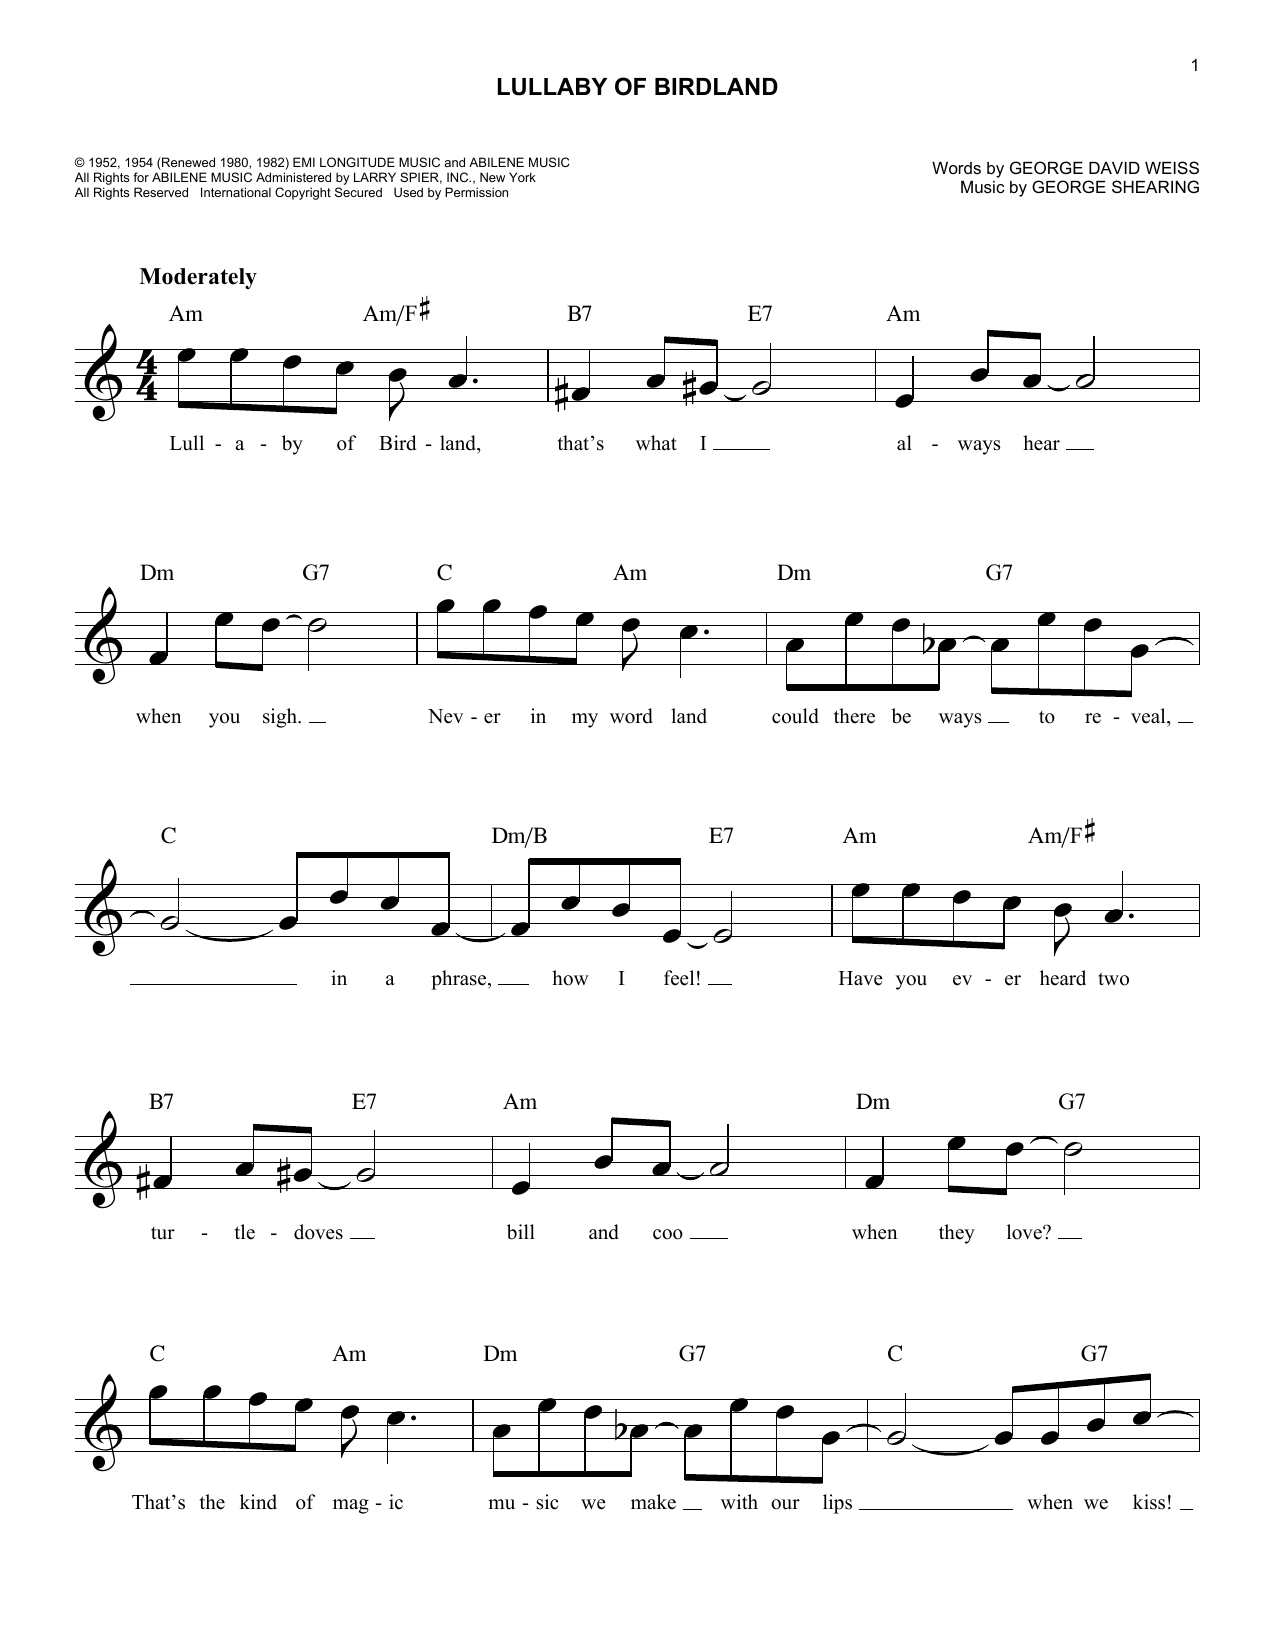 Benny Golson Lullaby Of Birdland sheet music notes and chords. Download Printable PDF.